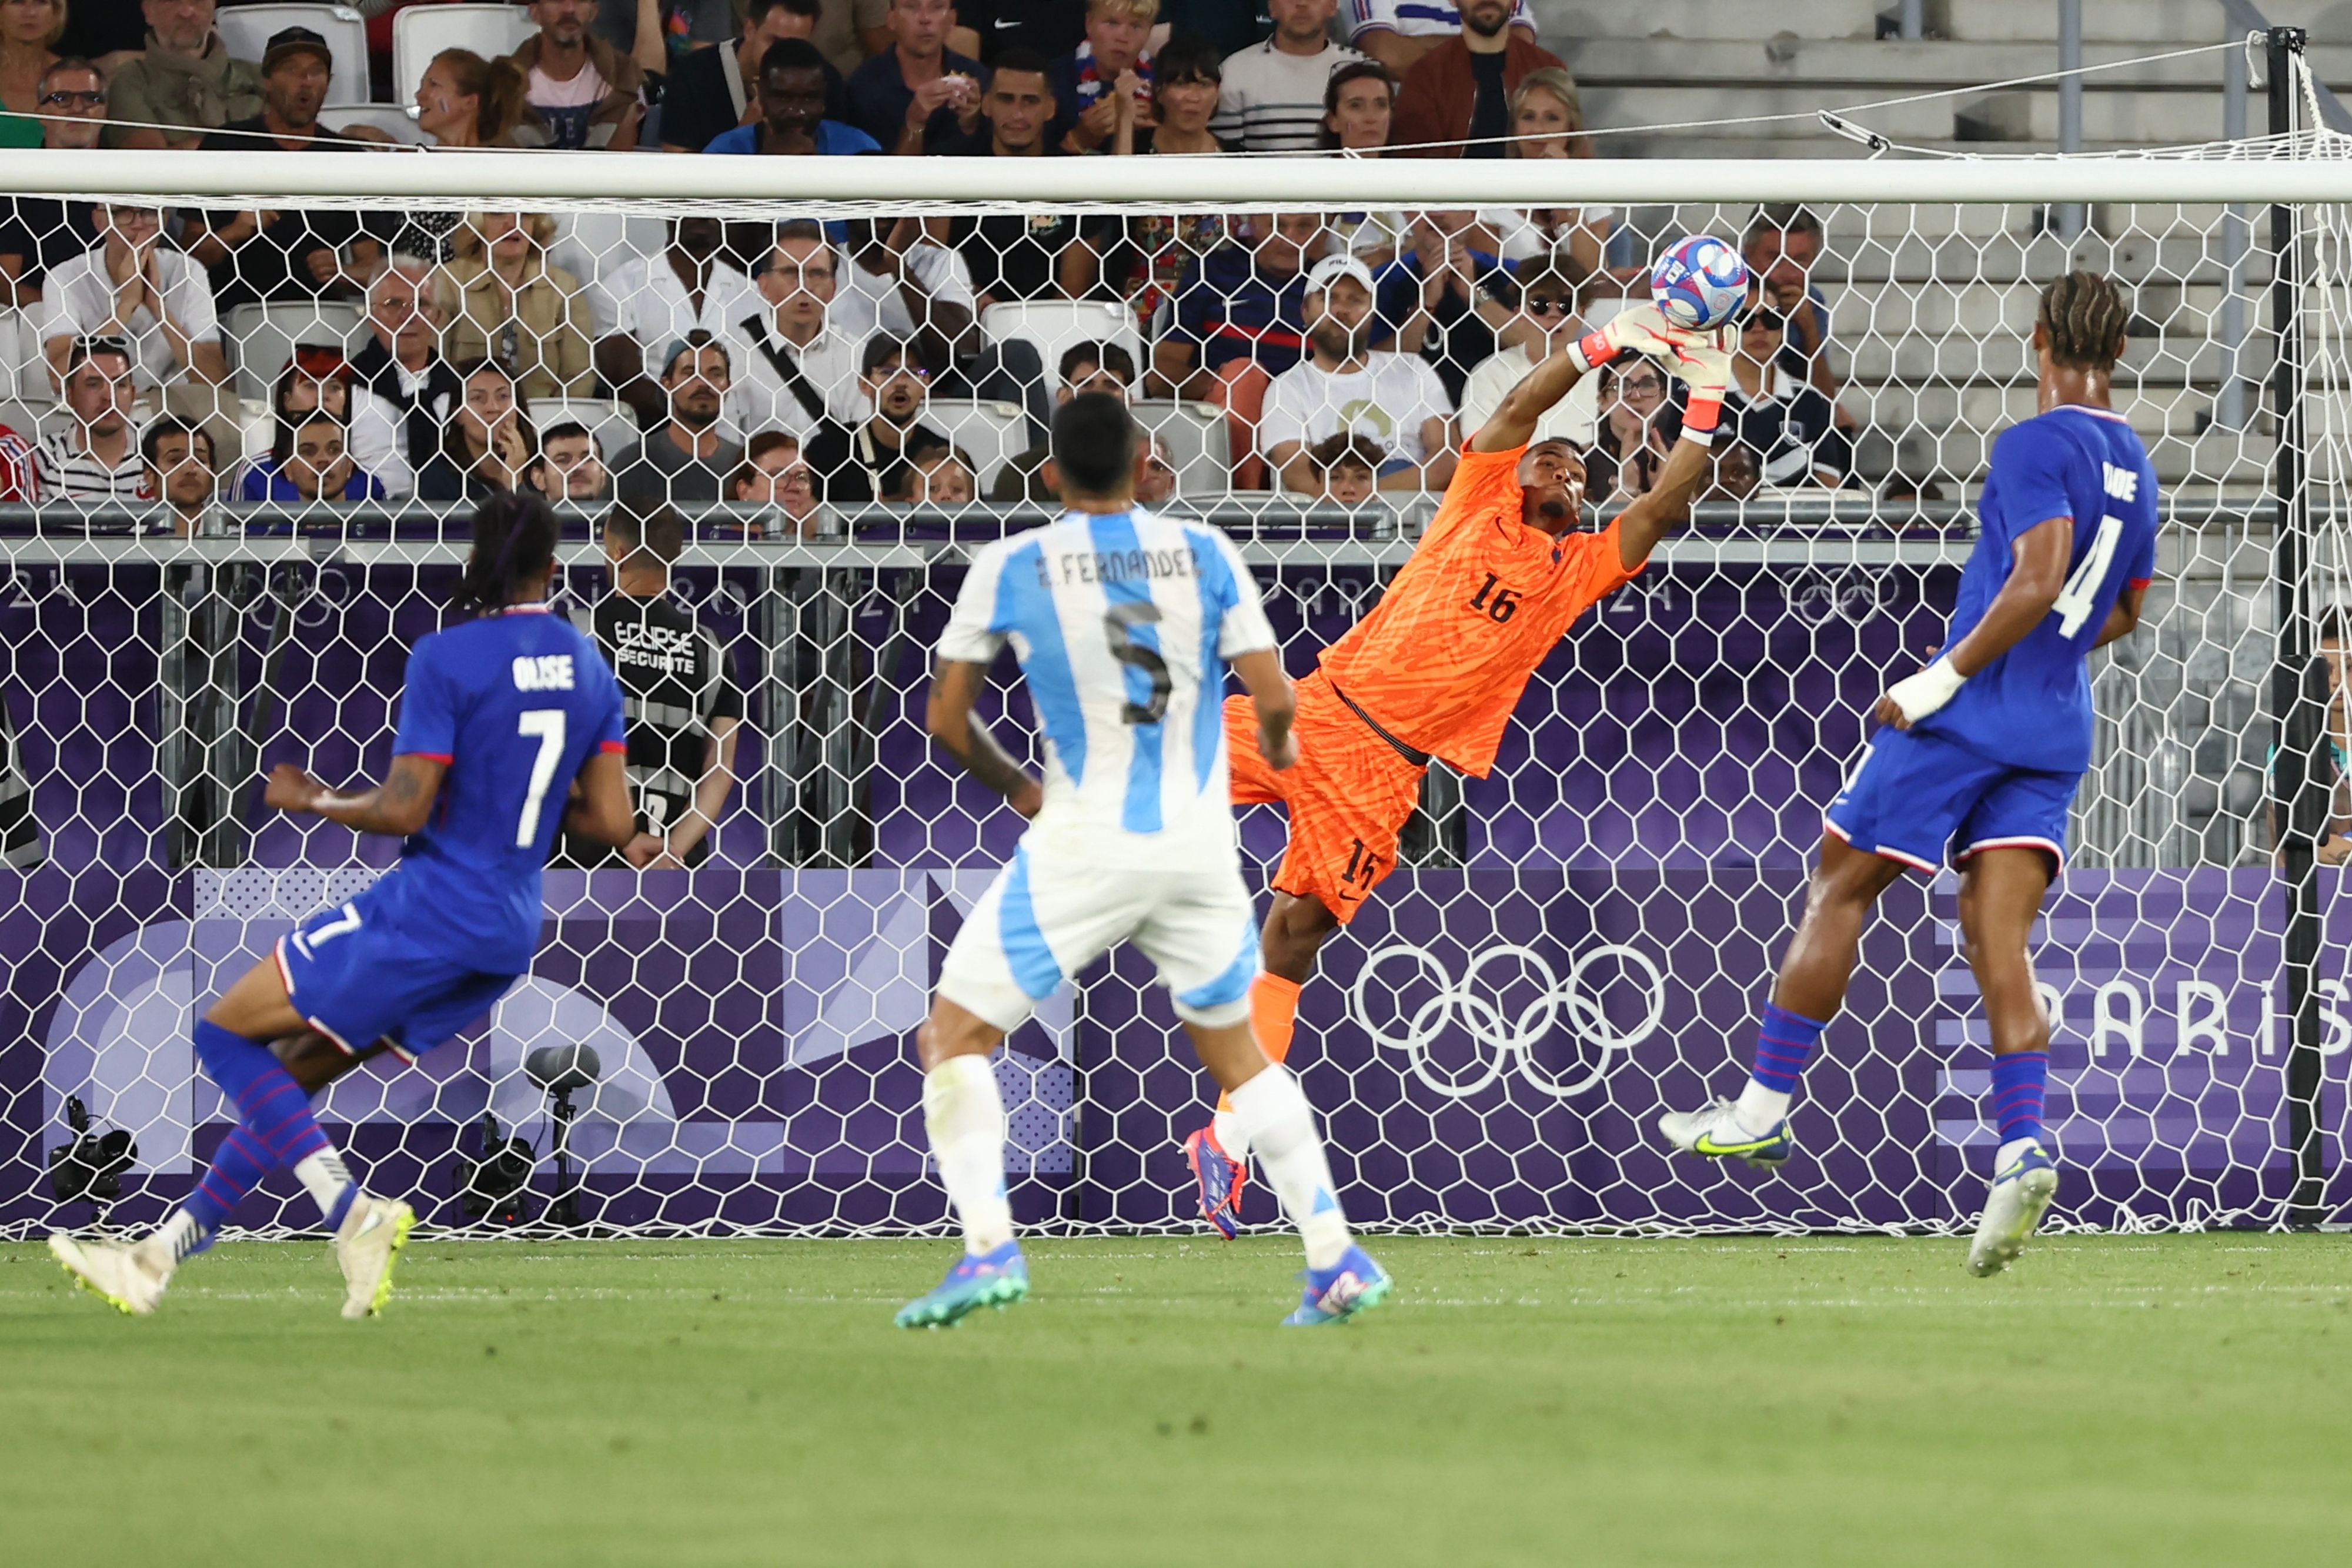 France's goalkeeper #16 Guillaume Restes makes a save in the men's quarter-final football match between France and Argentina during the Paris 2024 Olympic Games at the Bordeaux Stadium in Bordeaux on August 2, 2024. (Photo by ROMAIN PERROCHEAU / AFP)